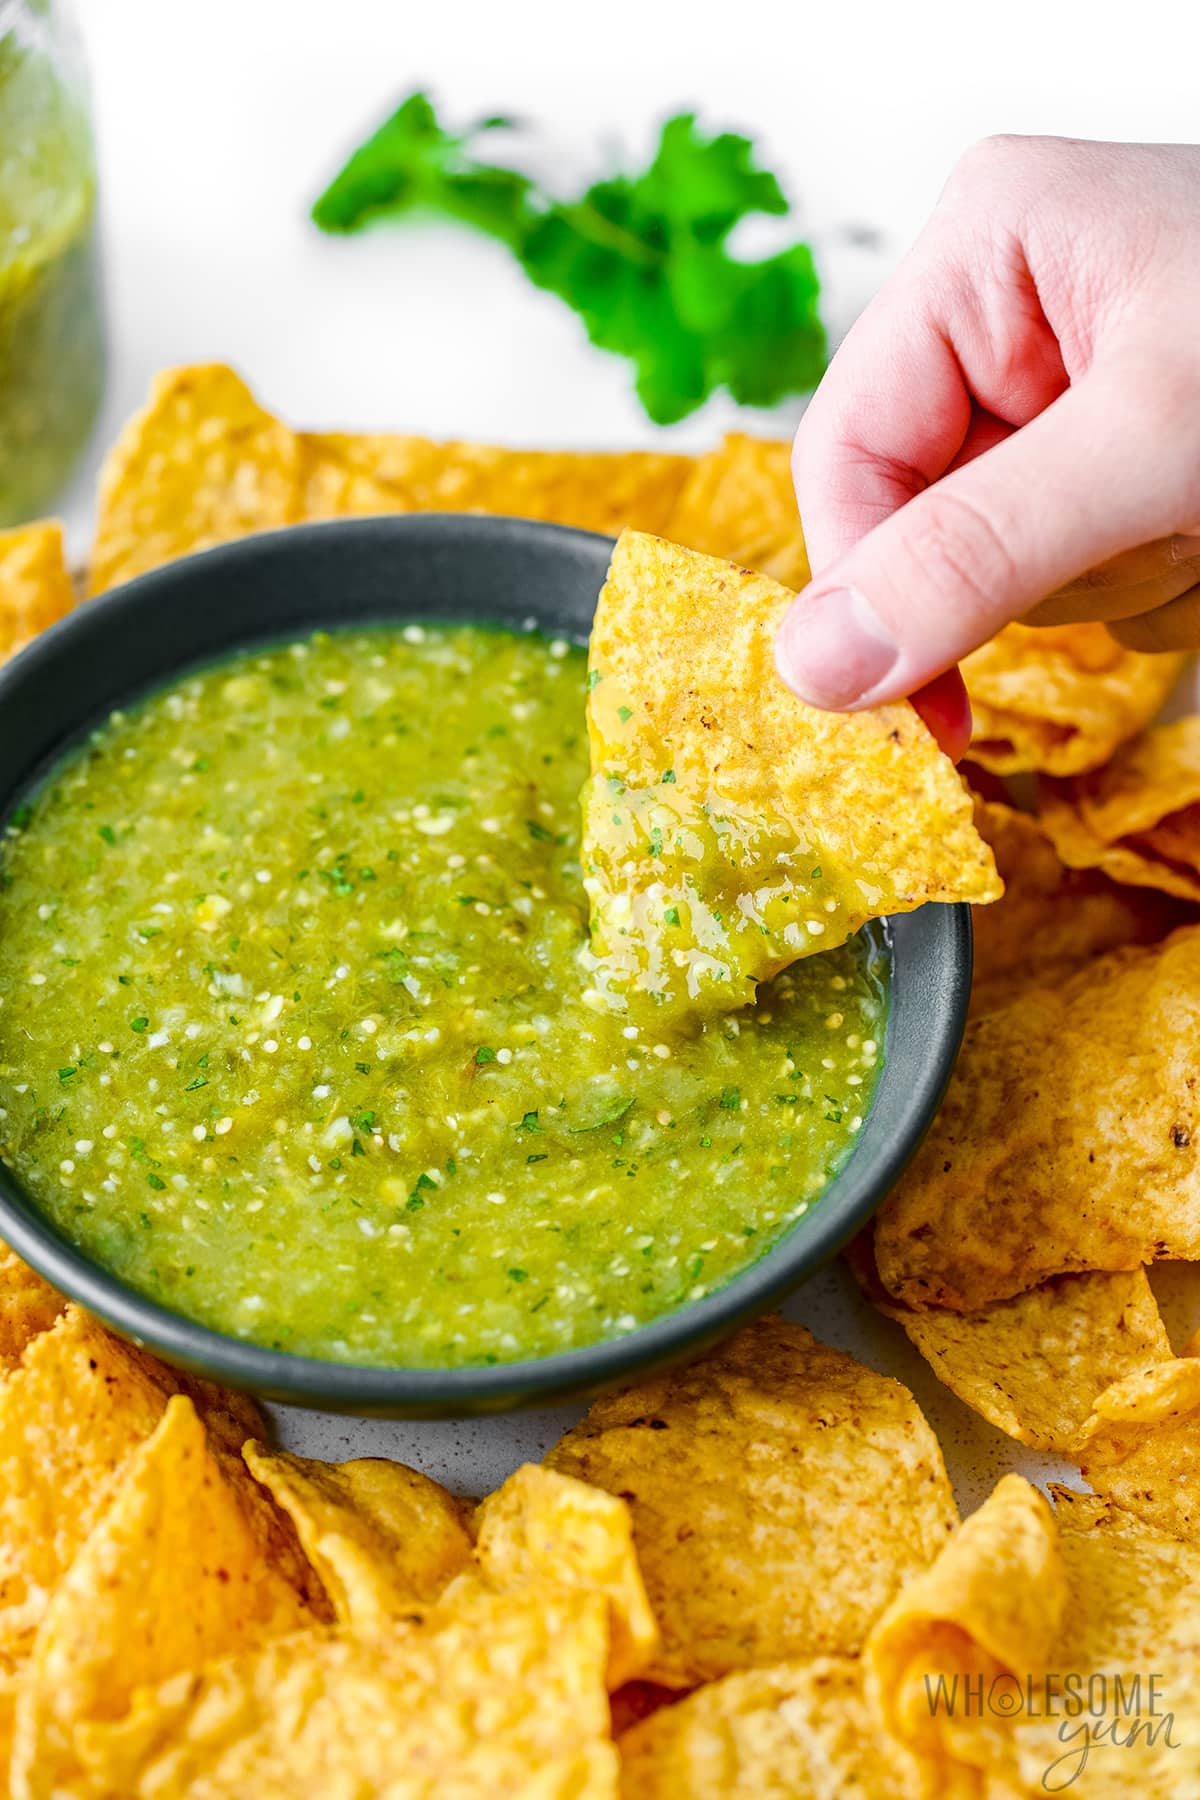 Tomatillo salsa with chip dunked in it.